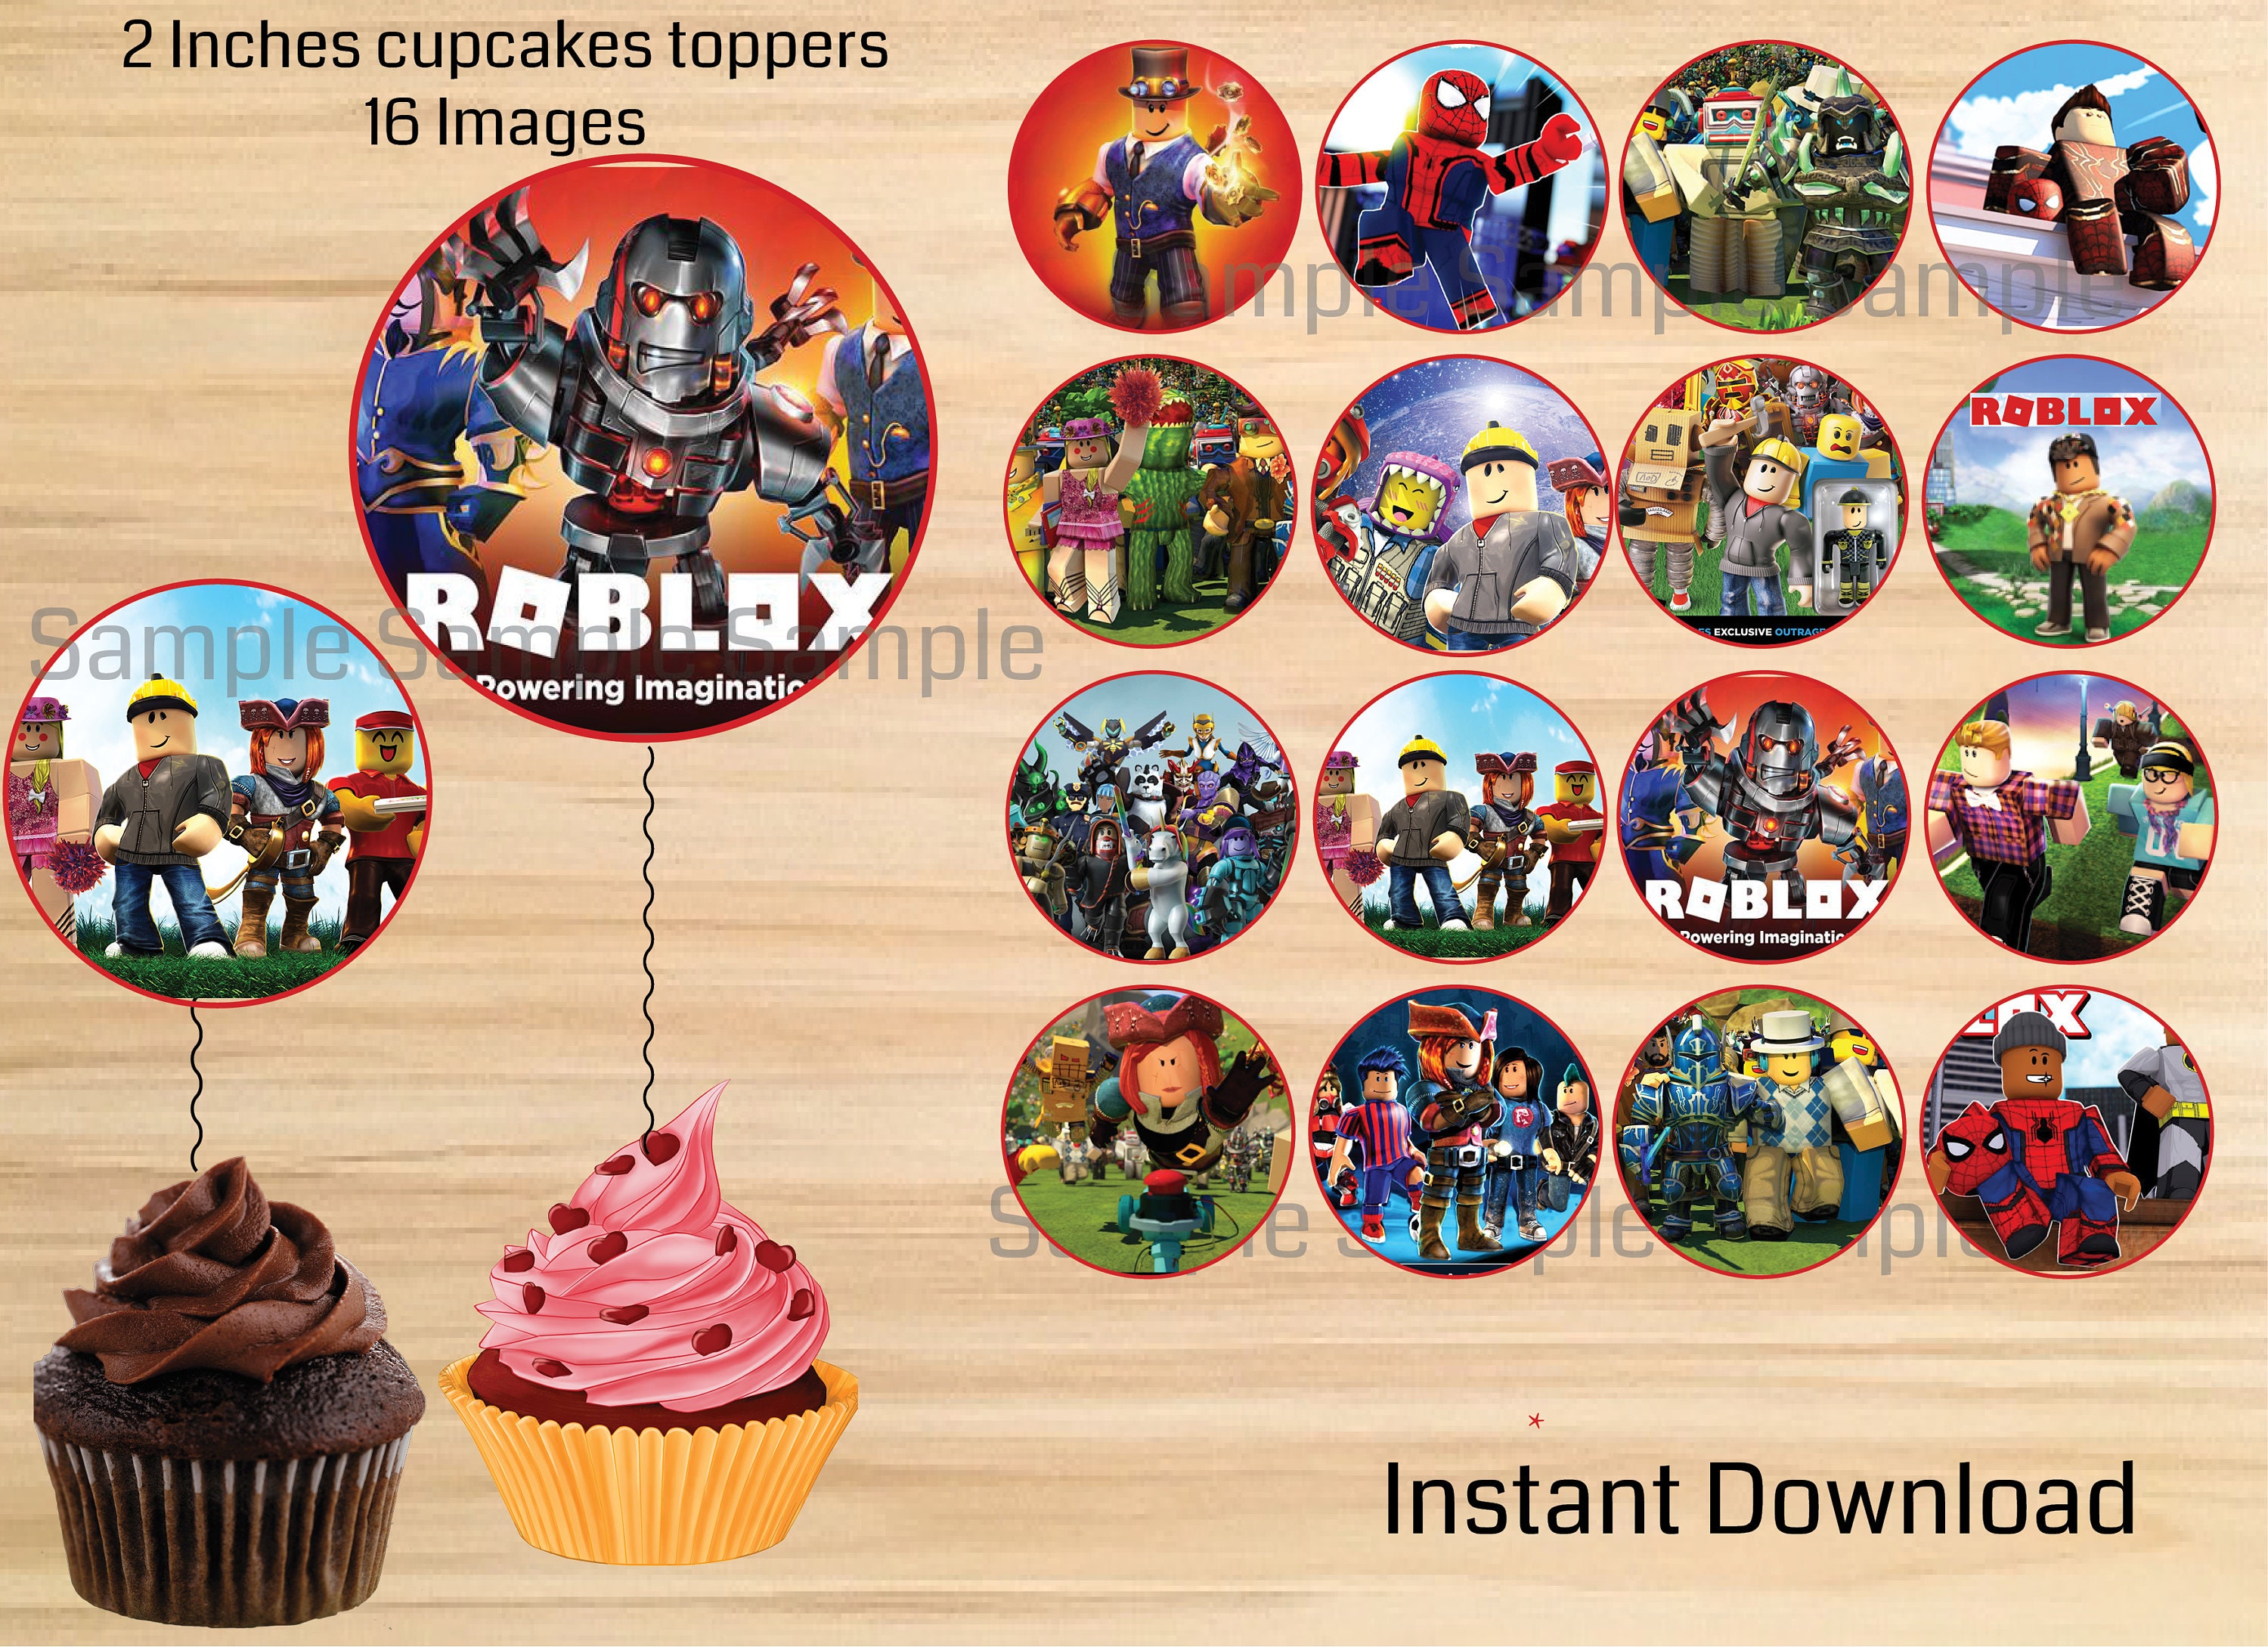 Instant Download Roblox Cupcake Toppers Roblox Party Etsy - roblox cupcake toppers party city